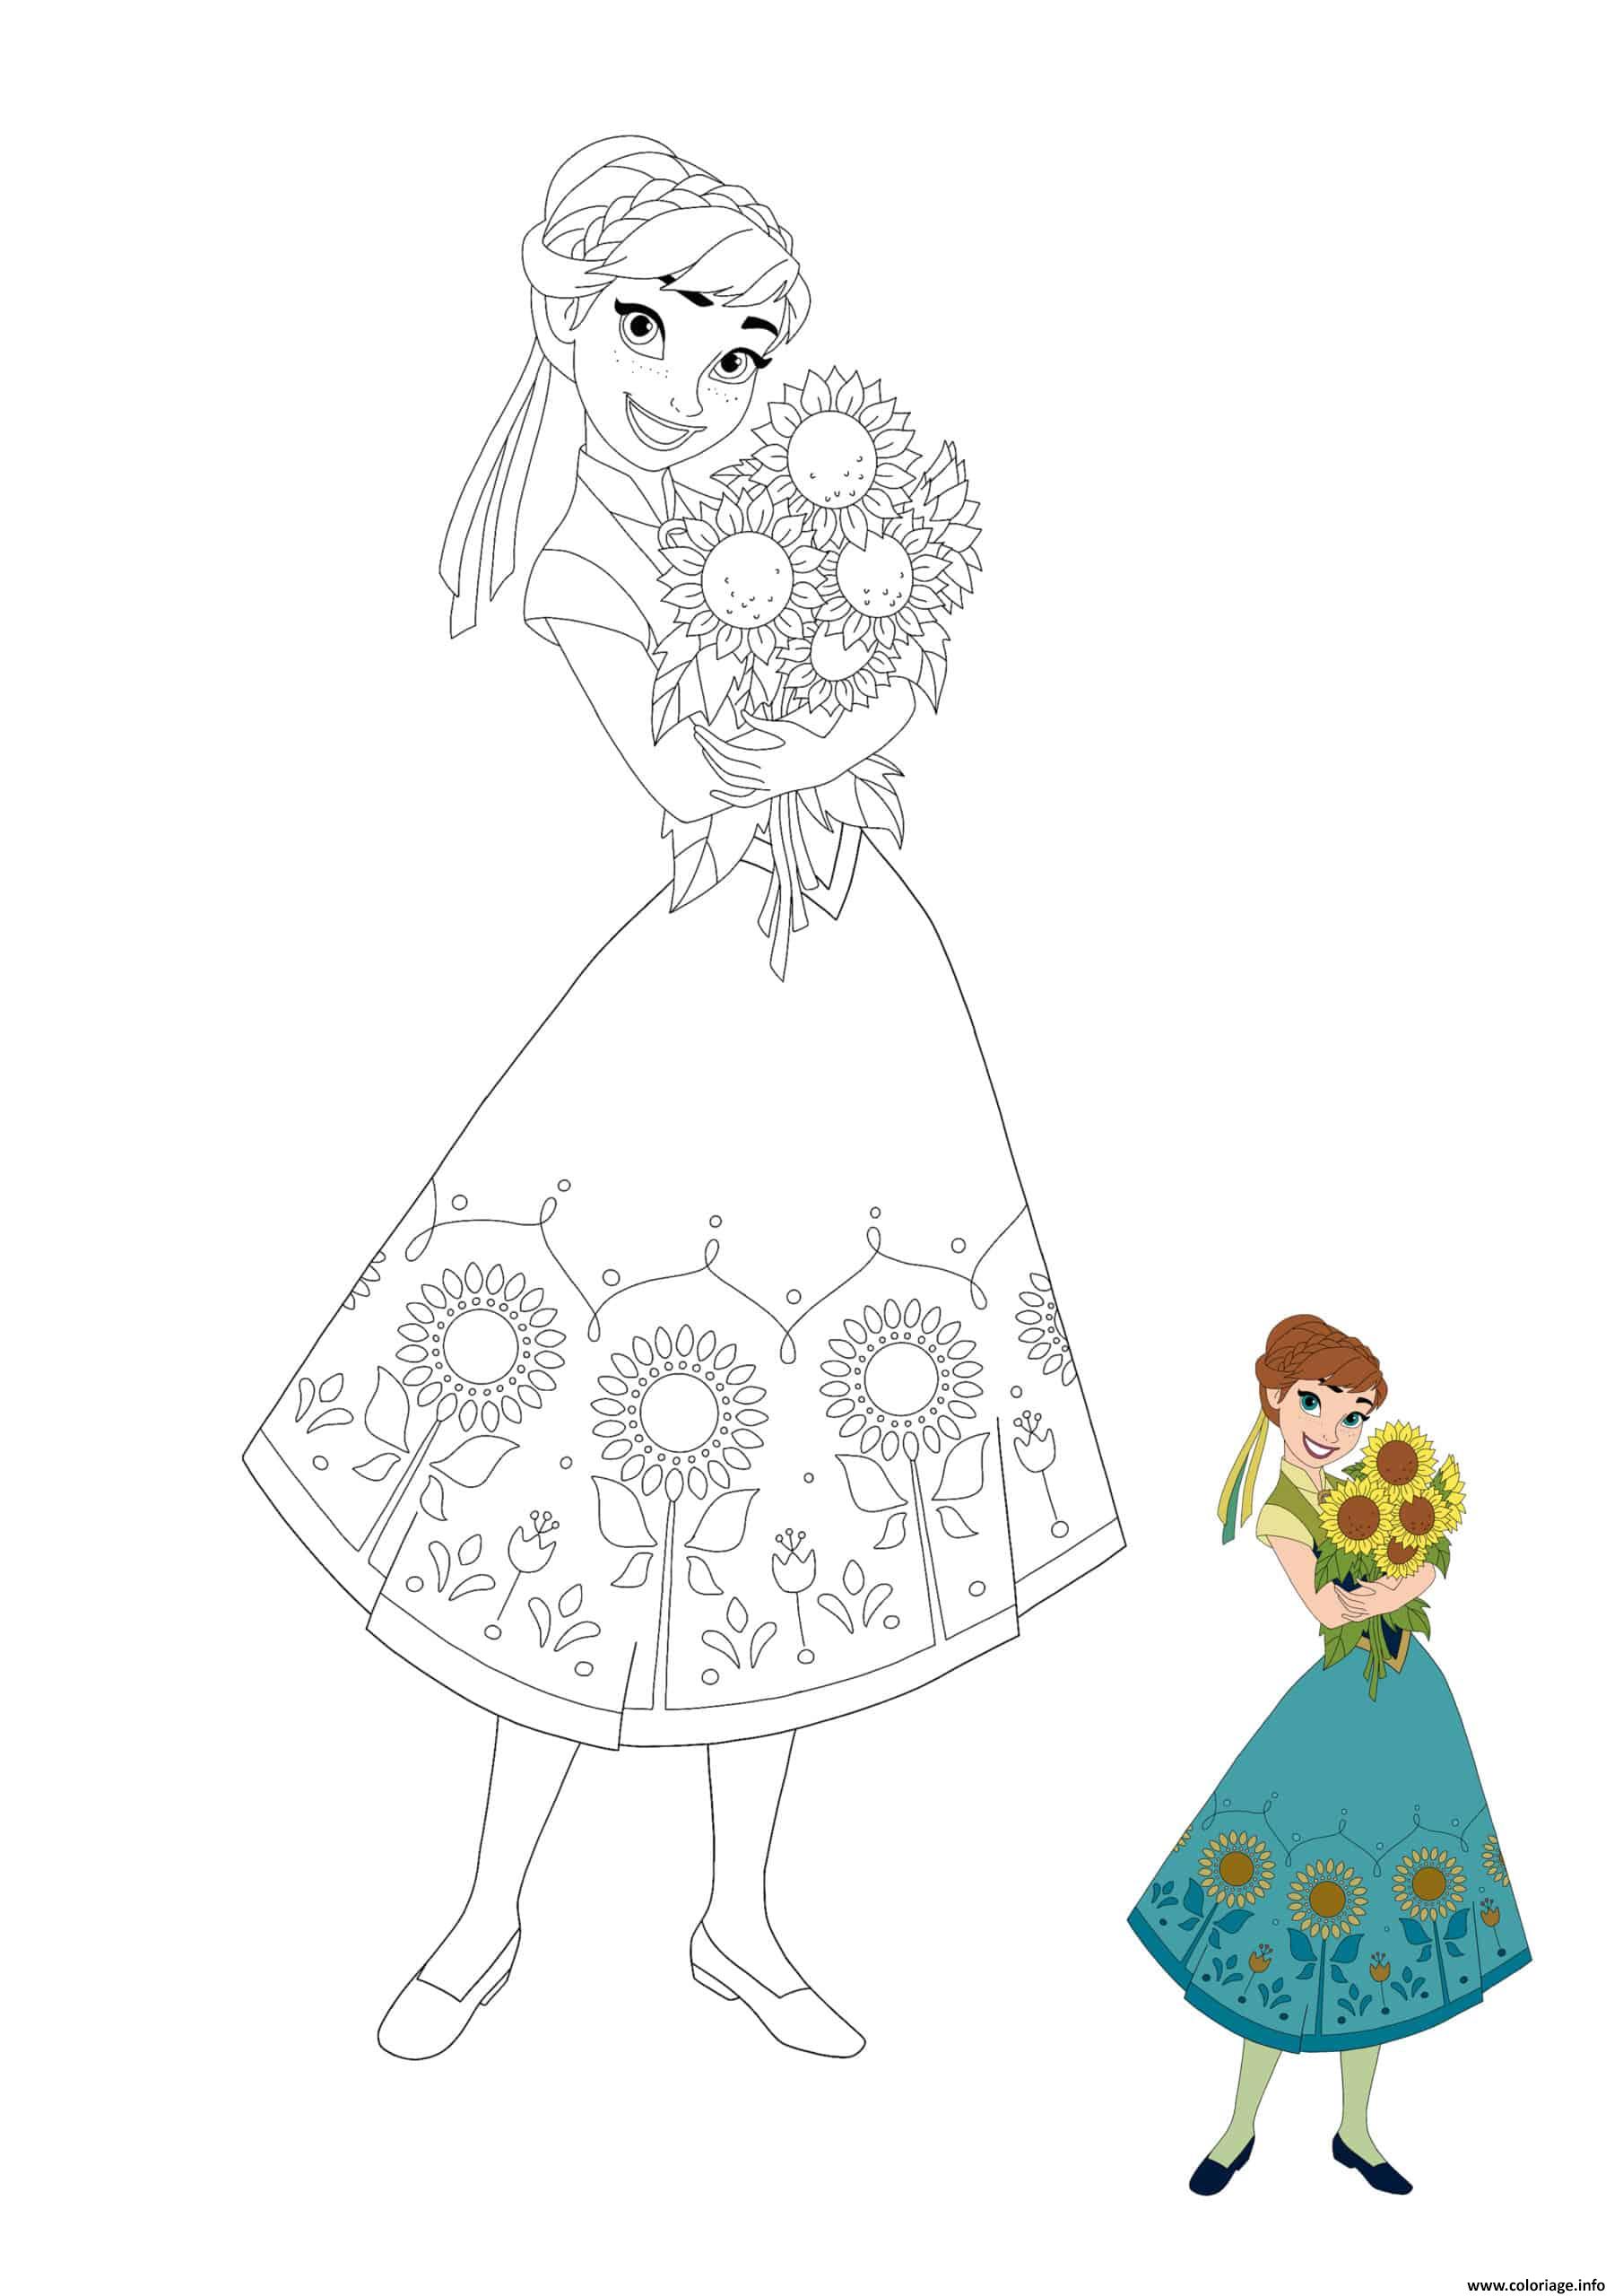 https://coloriage.info/images/ccovers/1608582307Princesse-Anna-with-Sunflowers.jpg